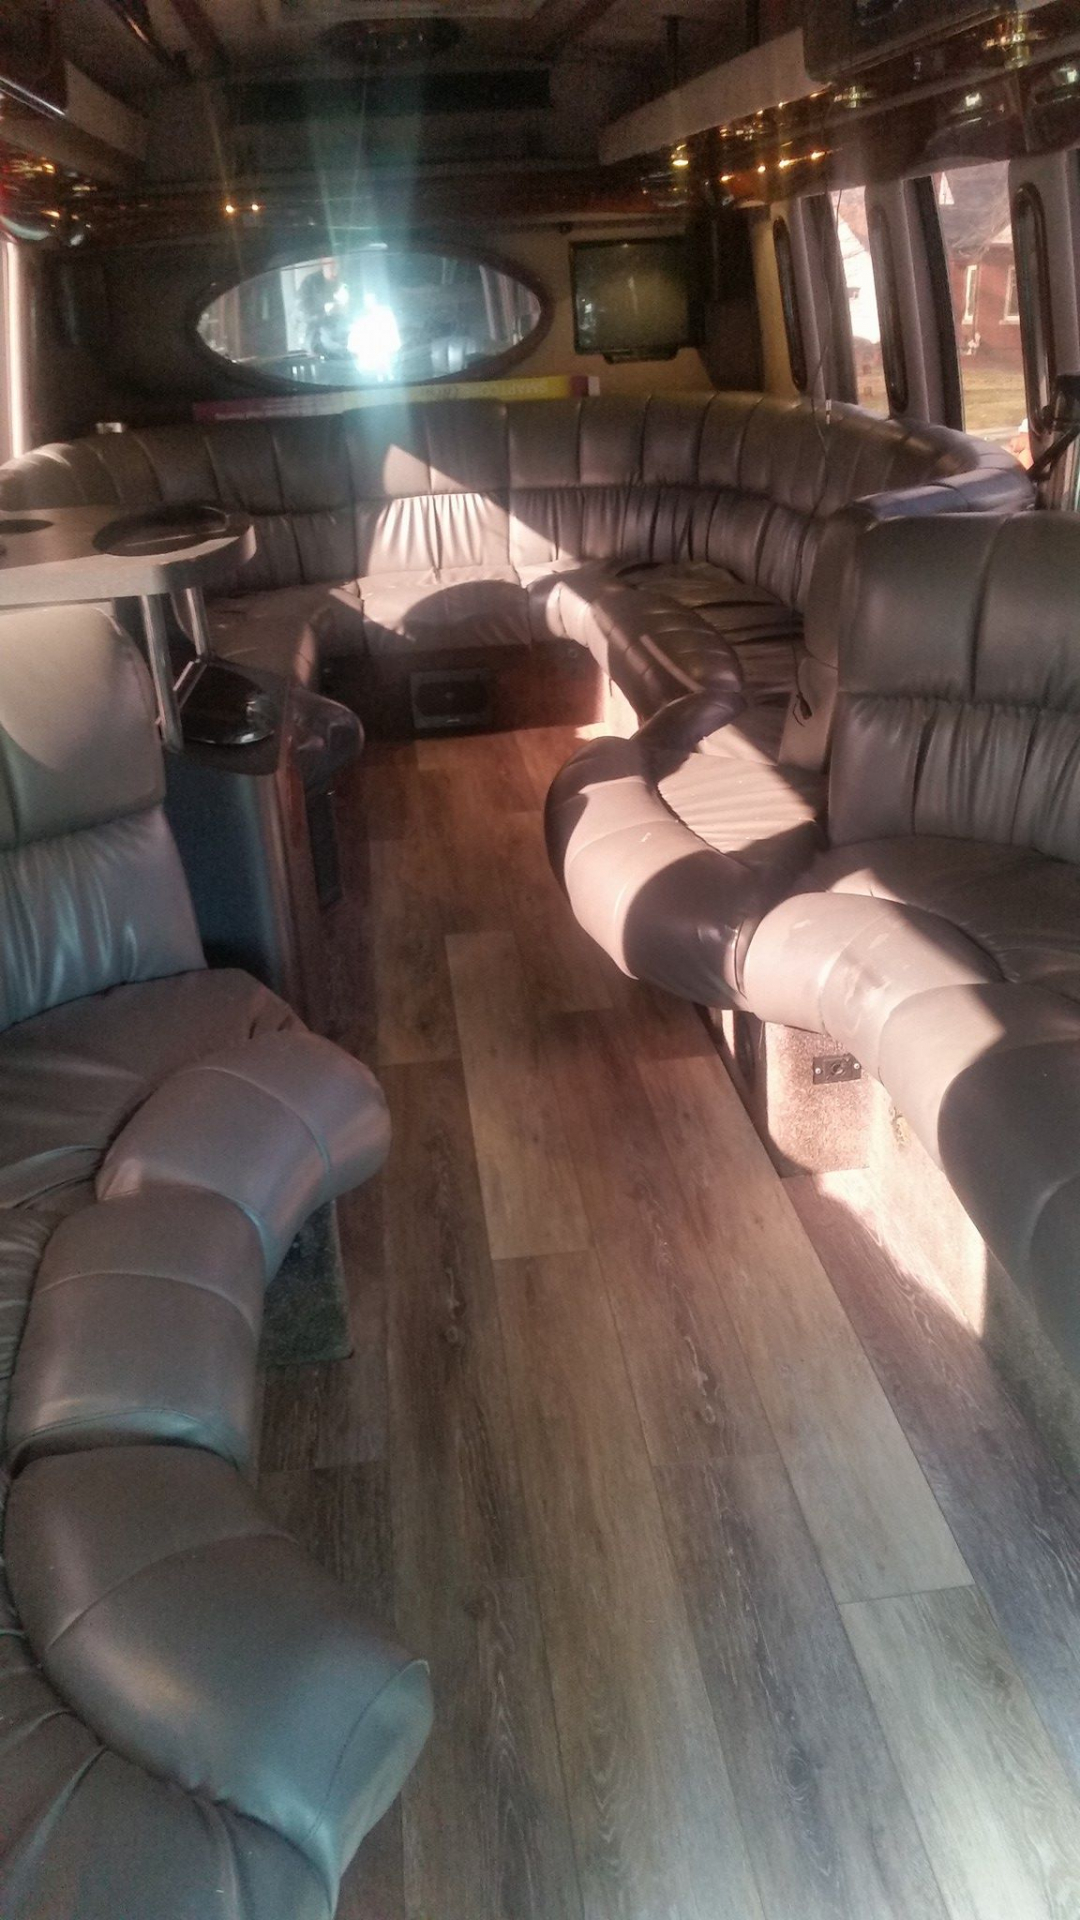 18 Passenger Limousine Party Bus.
Party Limo Bus /
Sylvania, OH

 / Hourly $0.00
